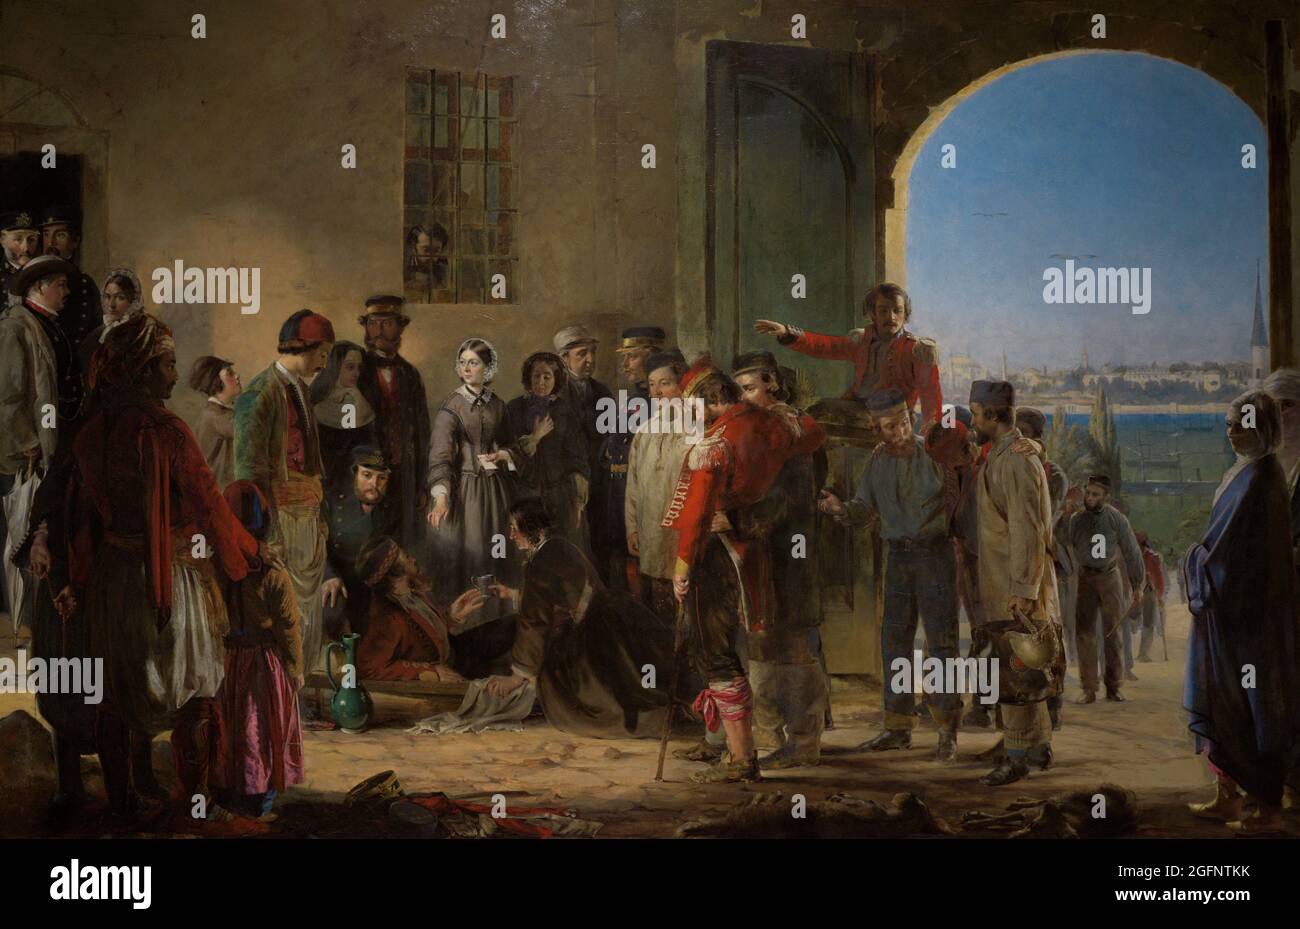 The Mission of Mercy: Florence Nightingale receiving the Wounded at Scutari. Painting by Jerry Barrett (1824-1906). Oil on canvas (147 x 218,2 cm), 1857. National Portrait Gallery. London, England, United Kingdom. Stock Photo